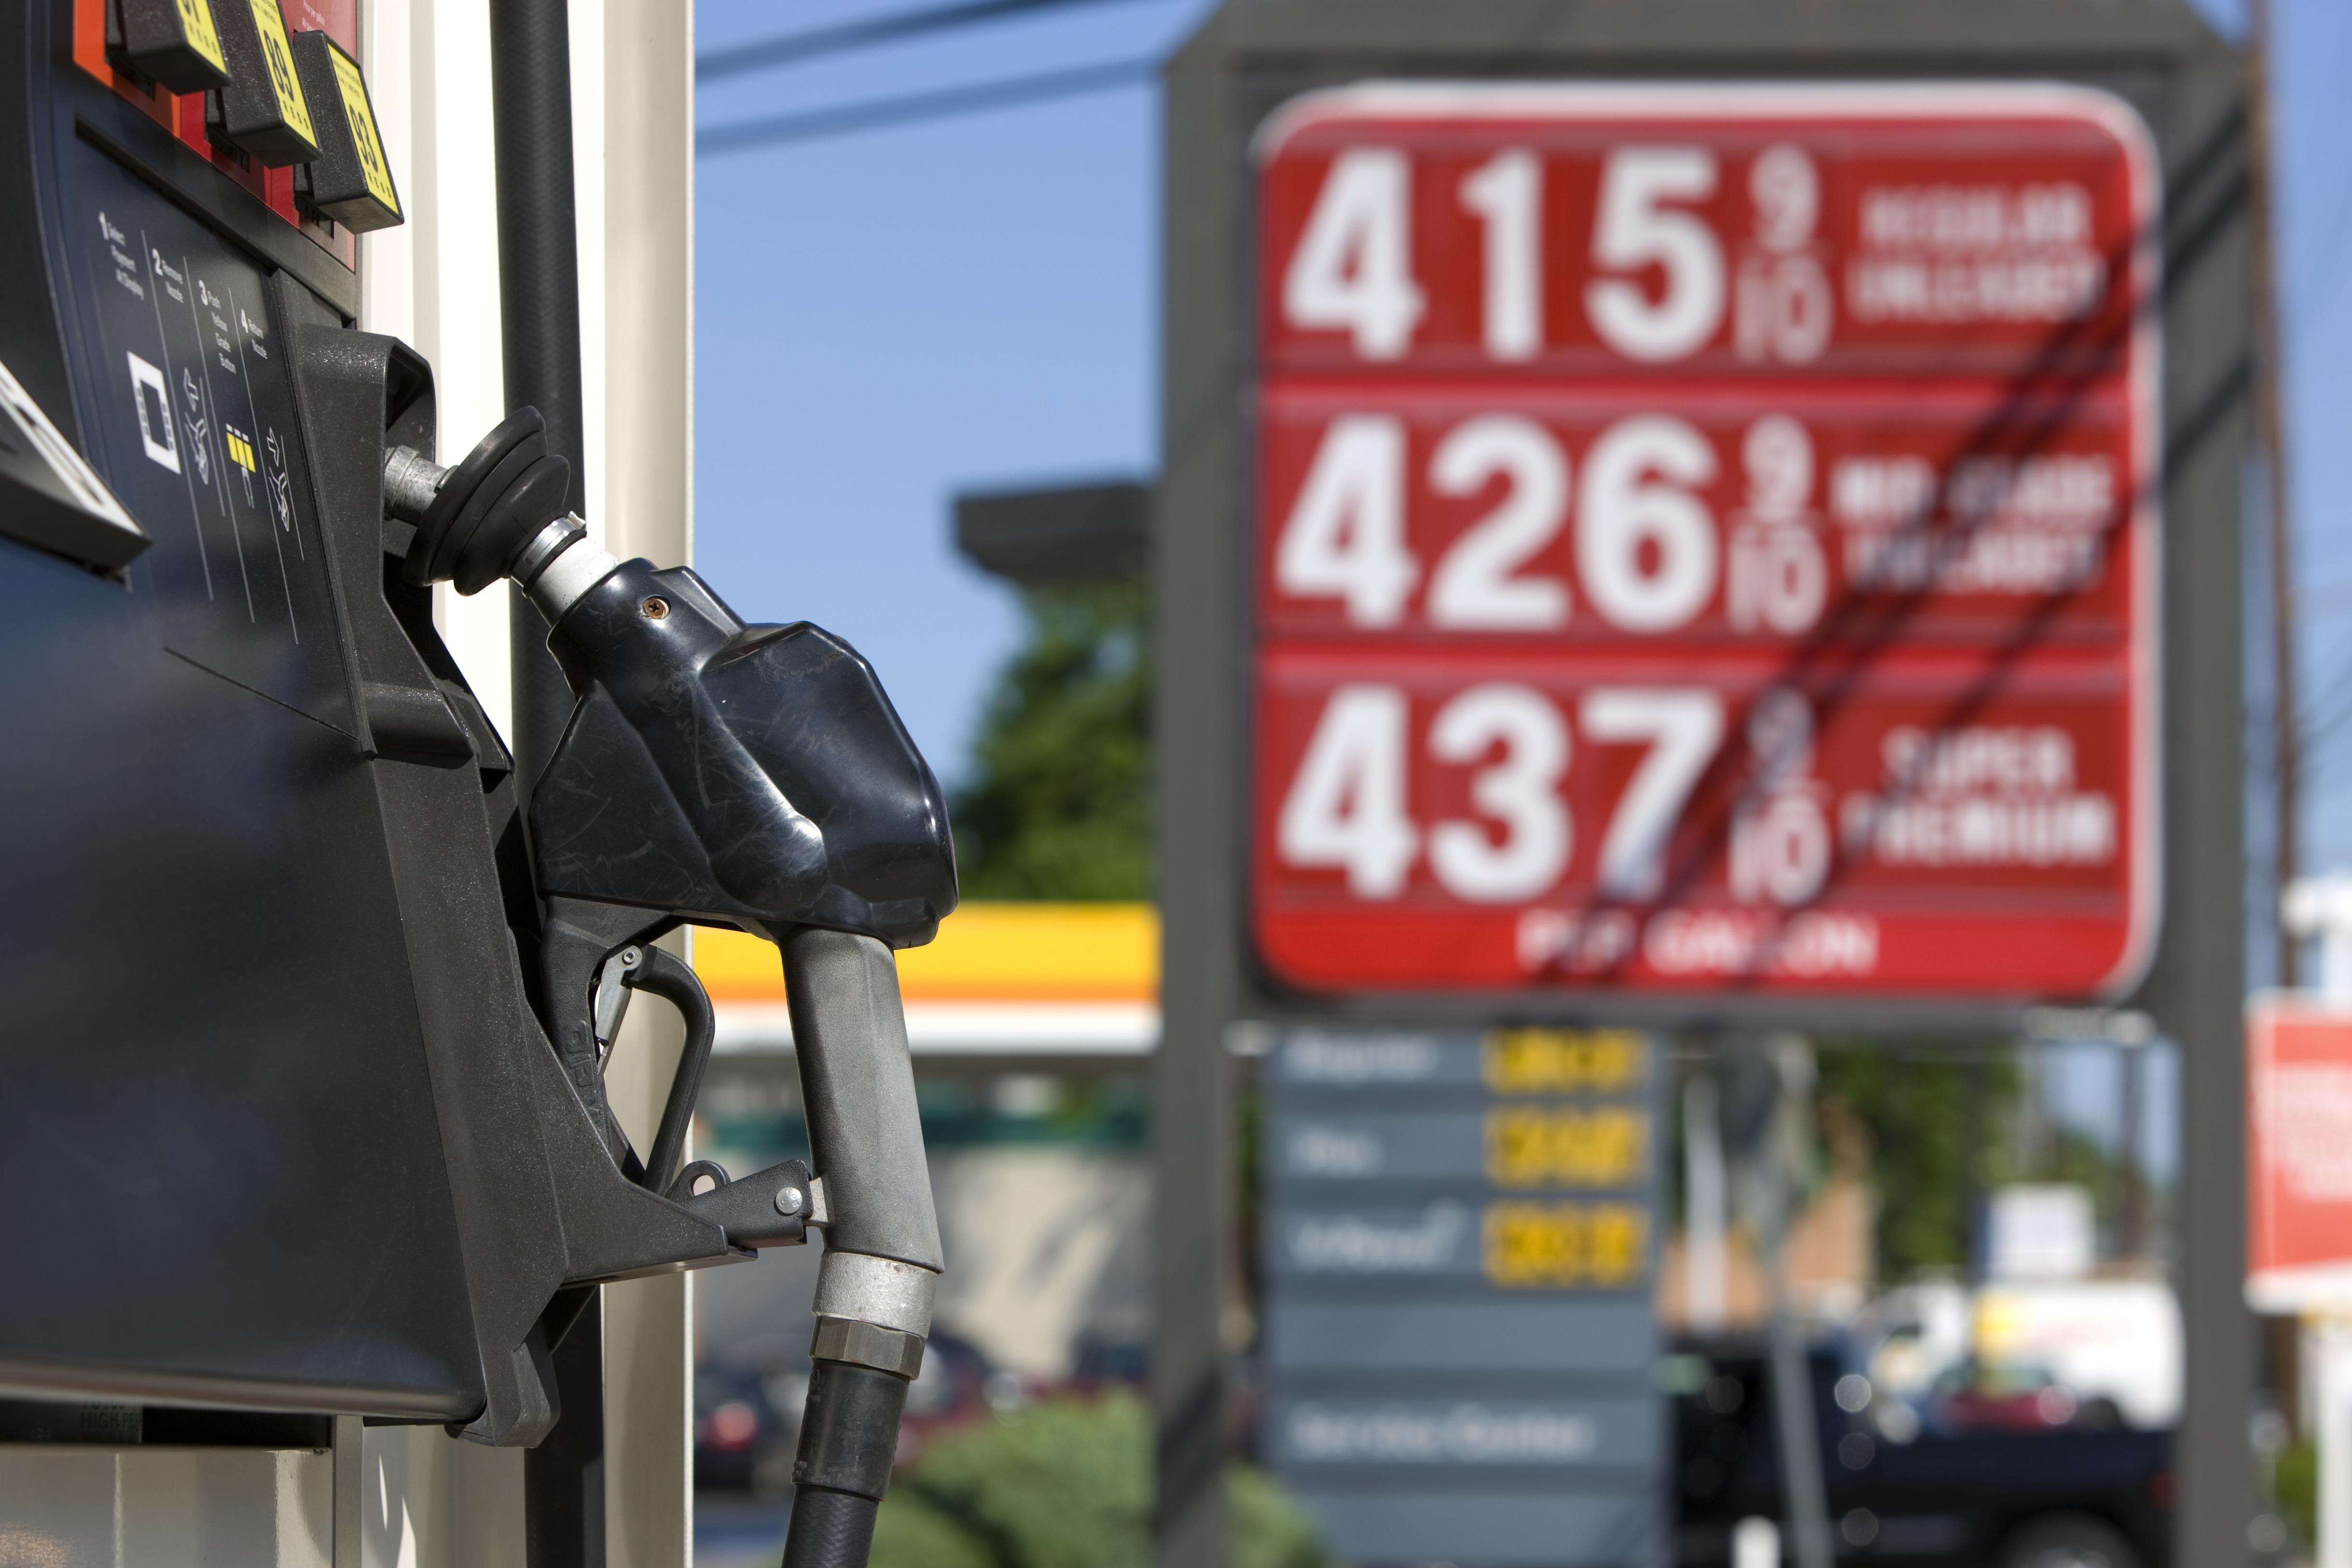 Image of a gas pump in the foreground and a gas price sign in the background